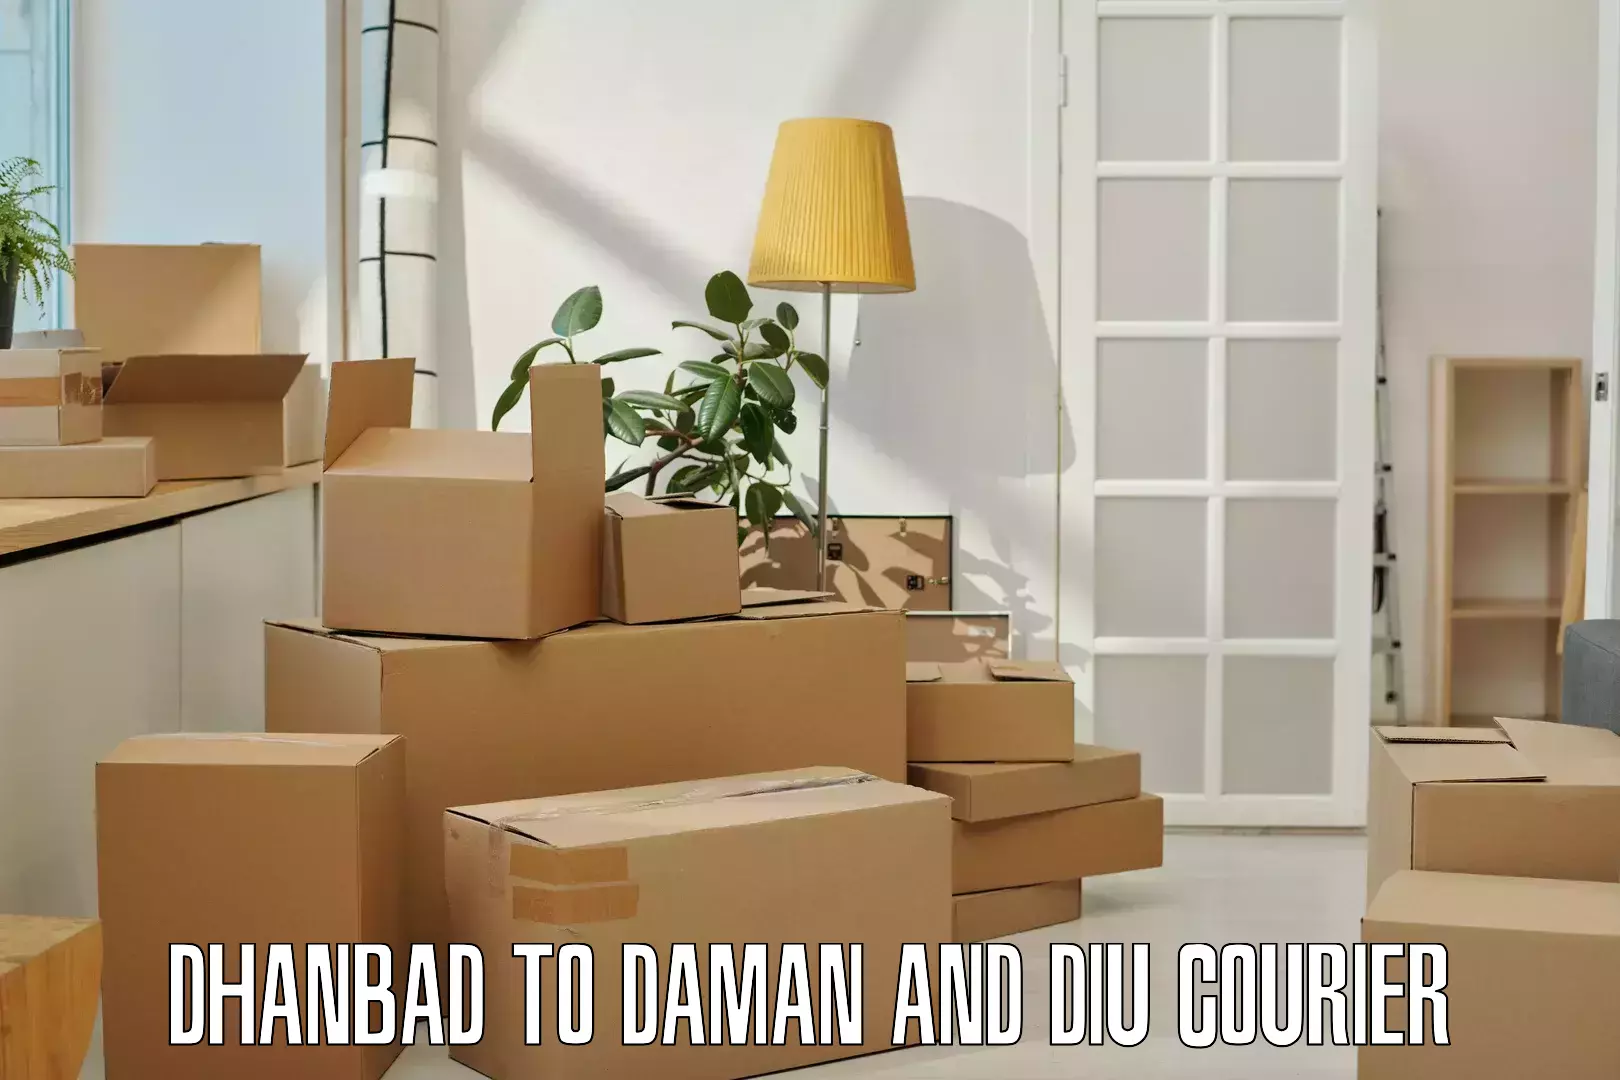 Subscription-based courier Dhanbad to Diu